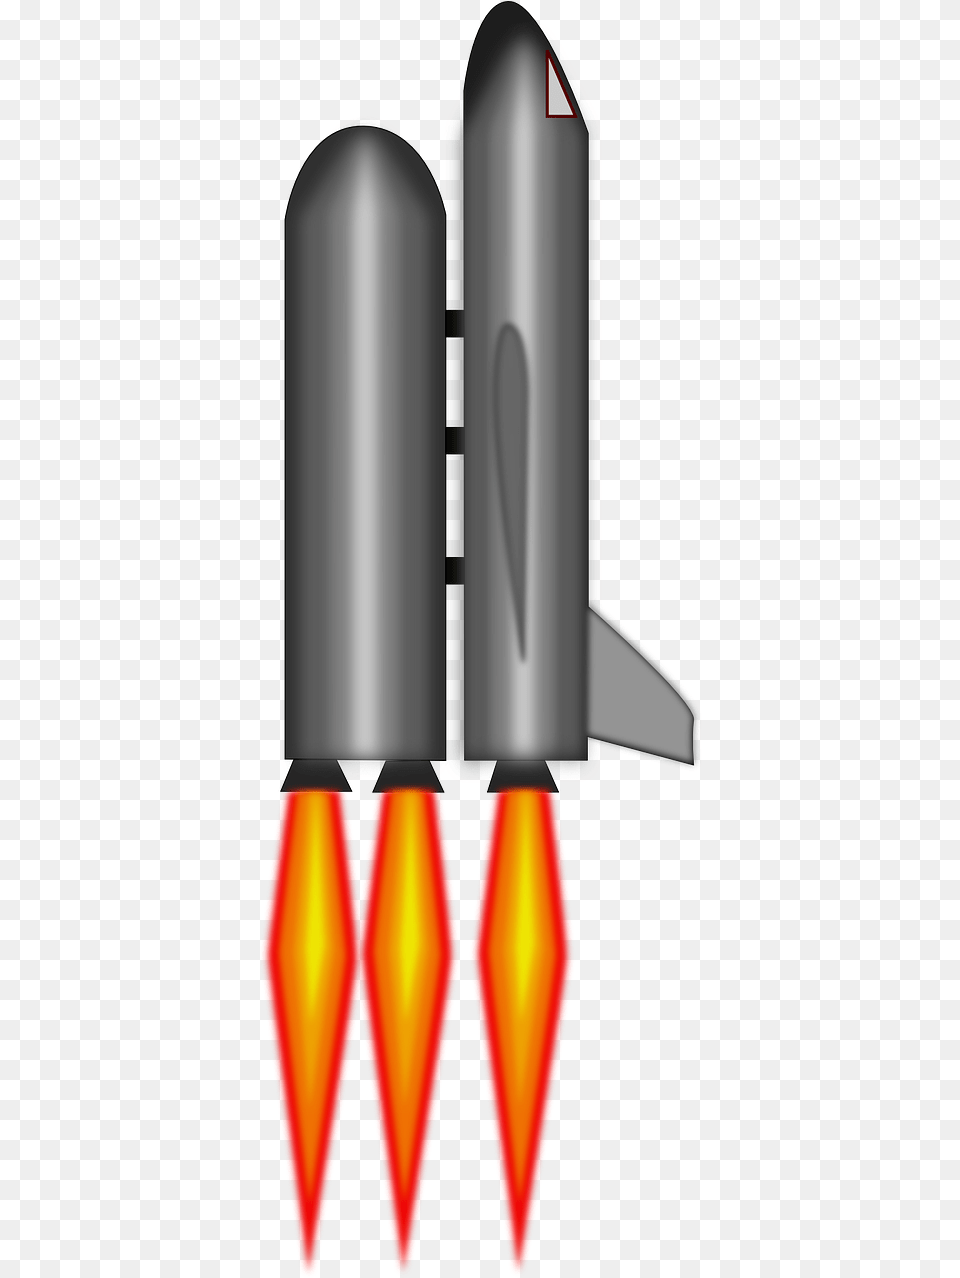 Rocket Space Ship Shuttle Free Vector Graphic On Pixabay Propulsor, Light Png Image